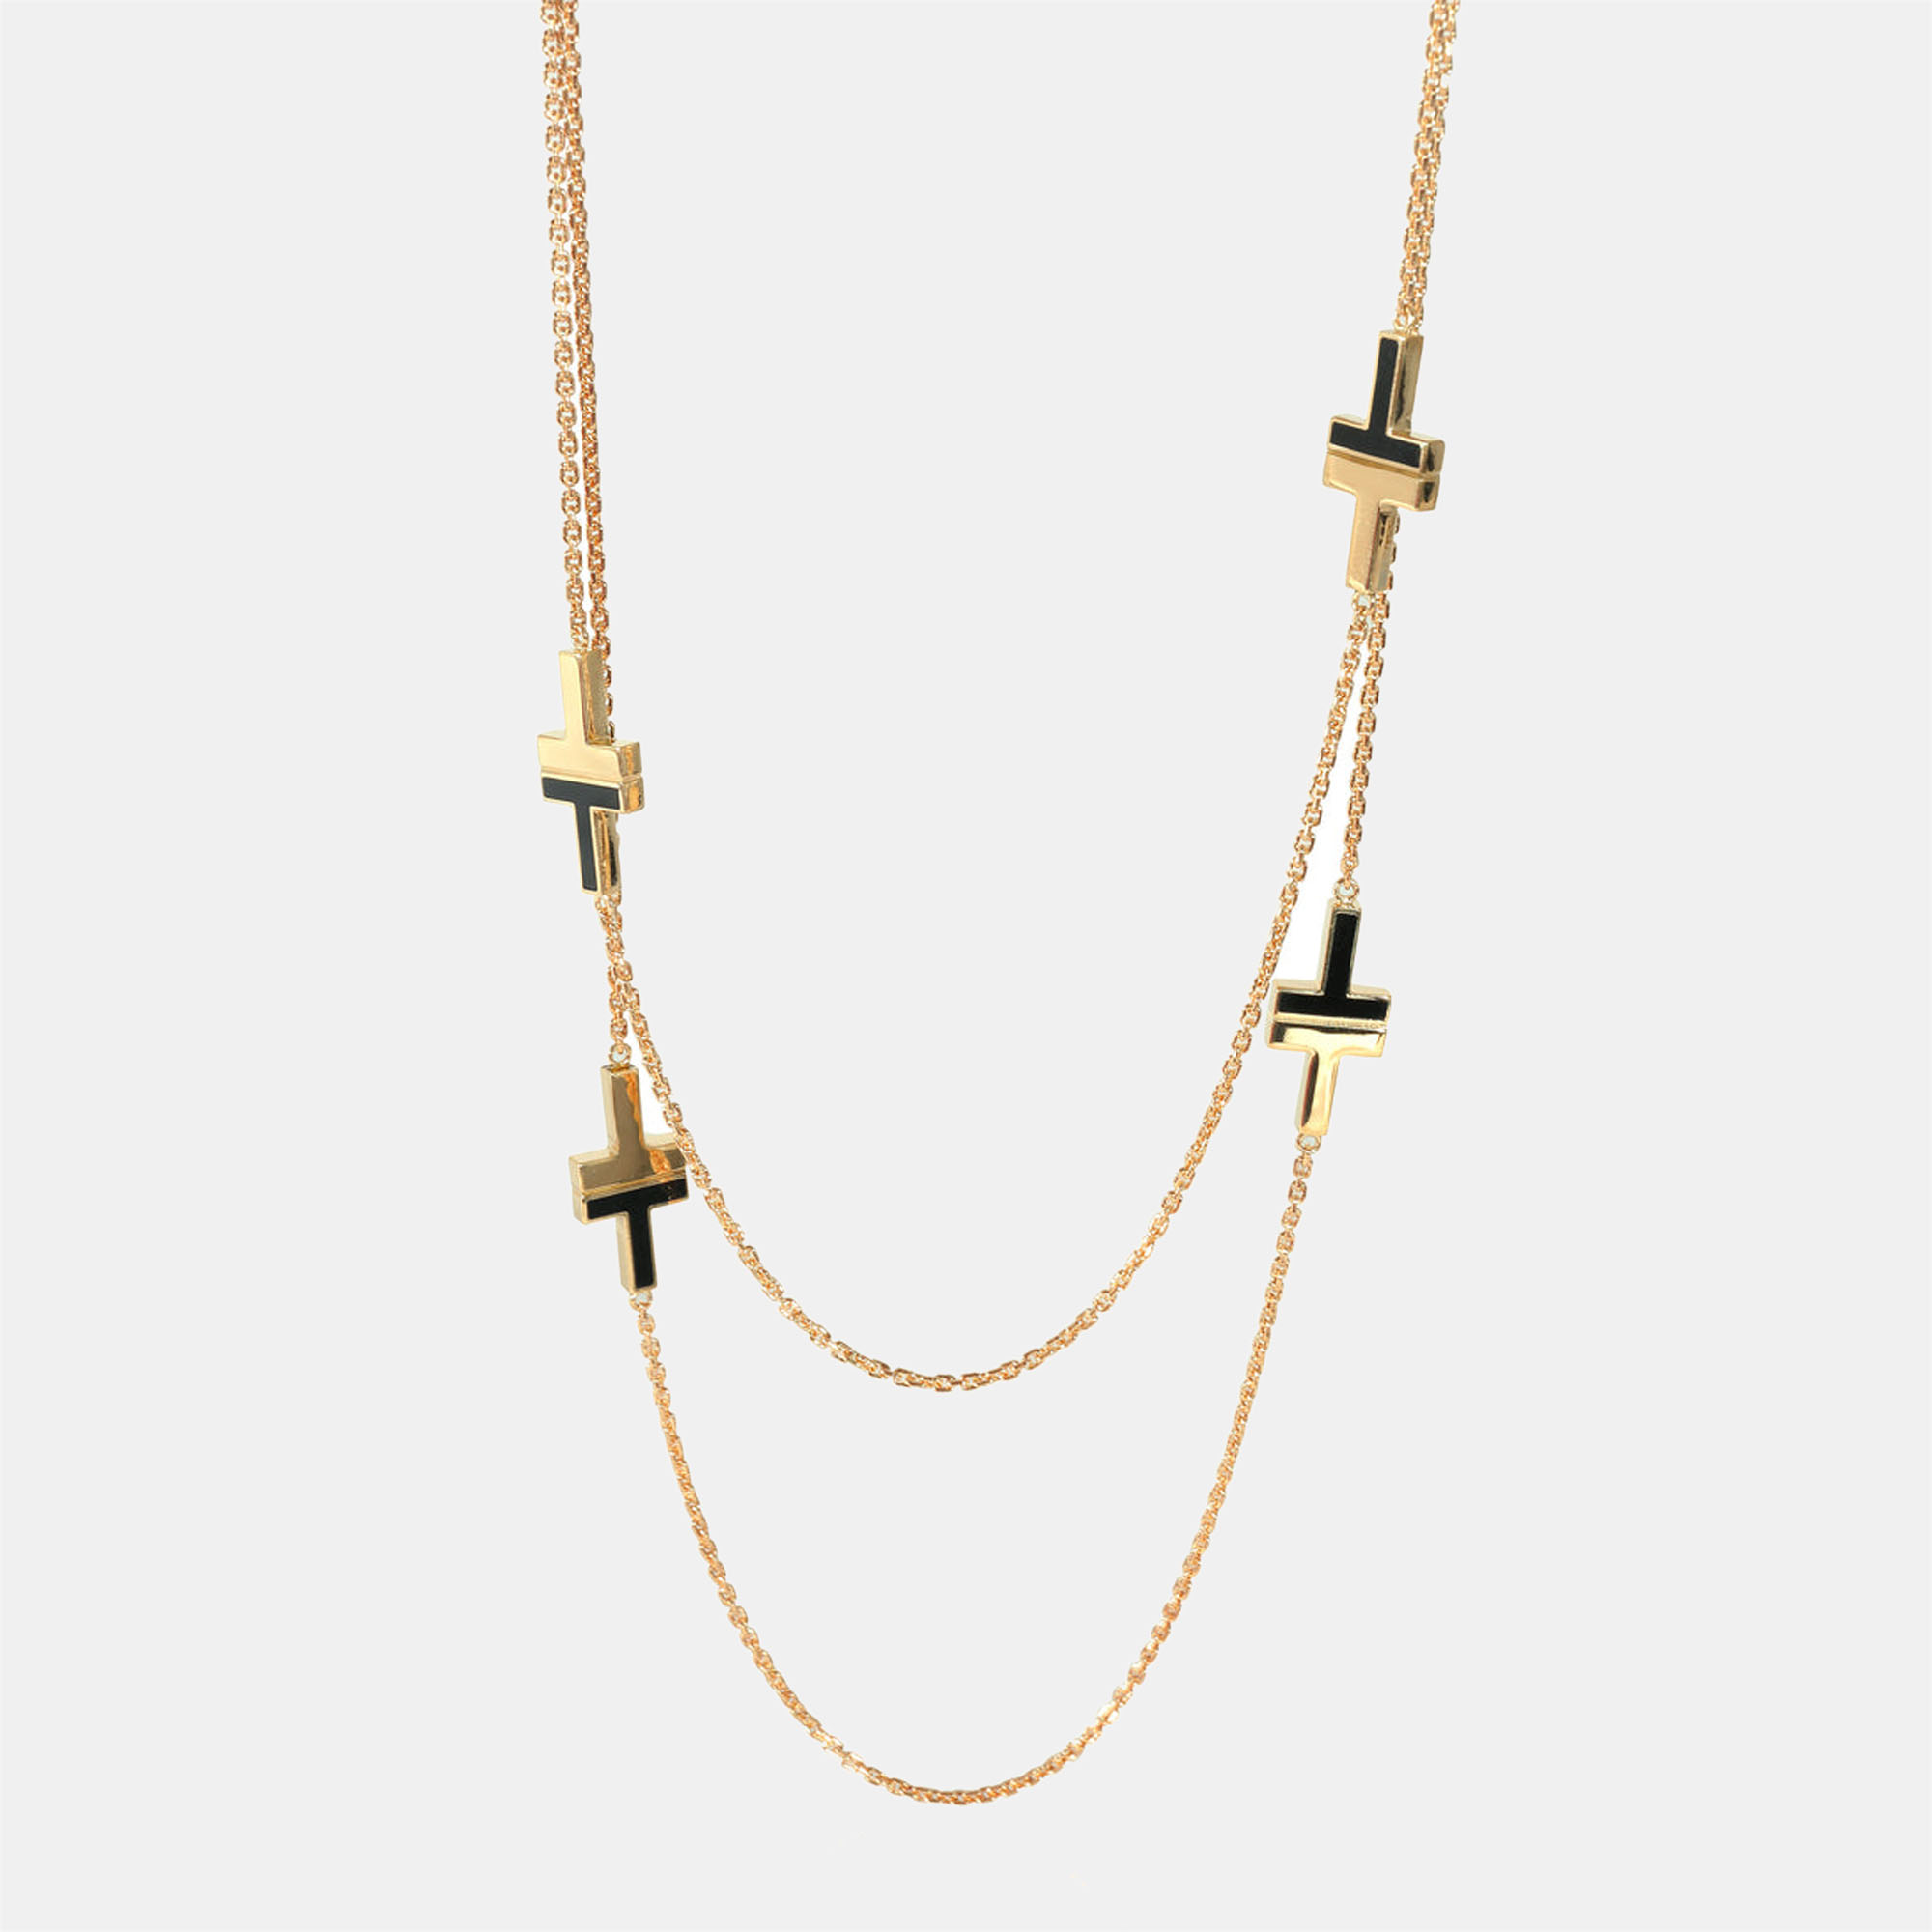 Pre-owned Tiffany & Co Tiffany T Black Onyx Station Necklace In 18k Yellow Gold